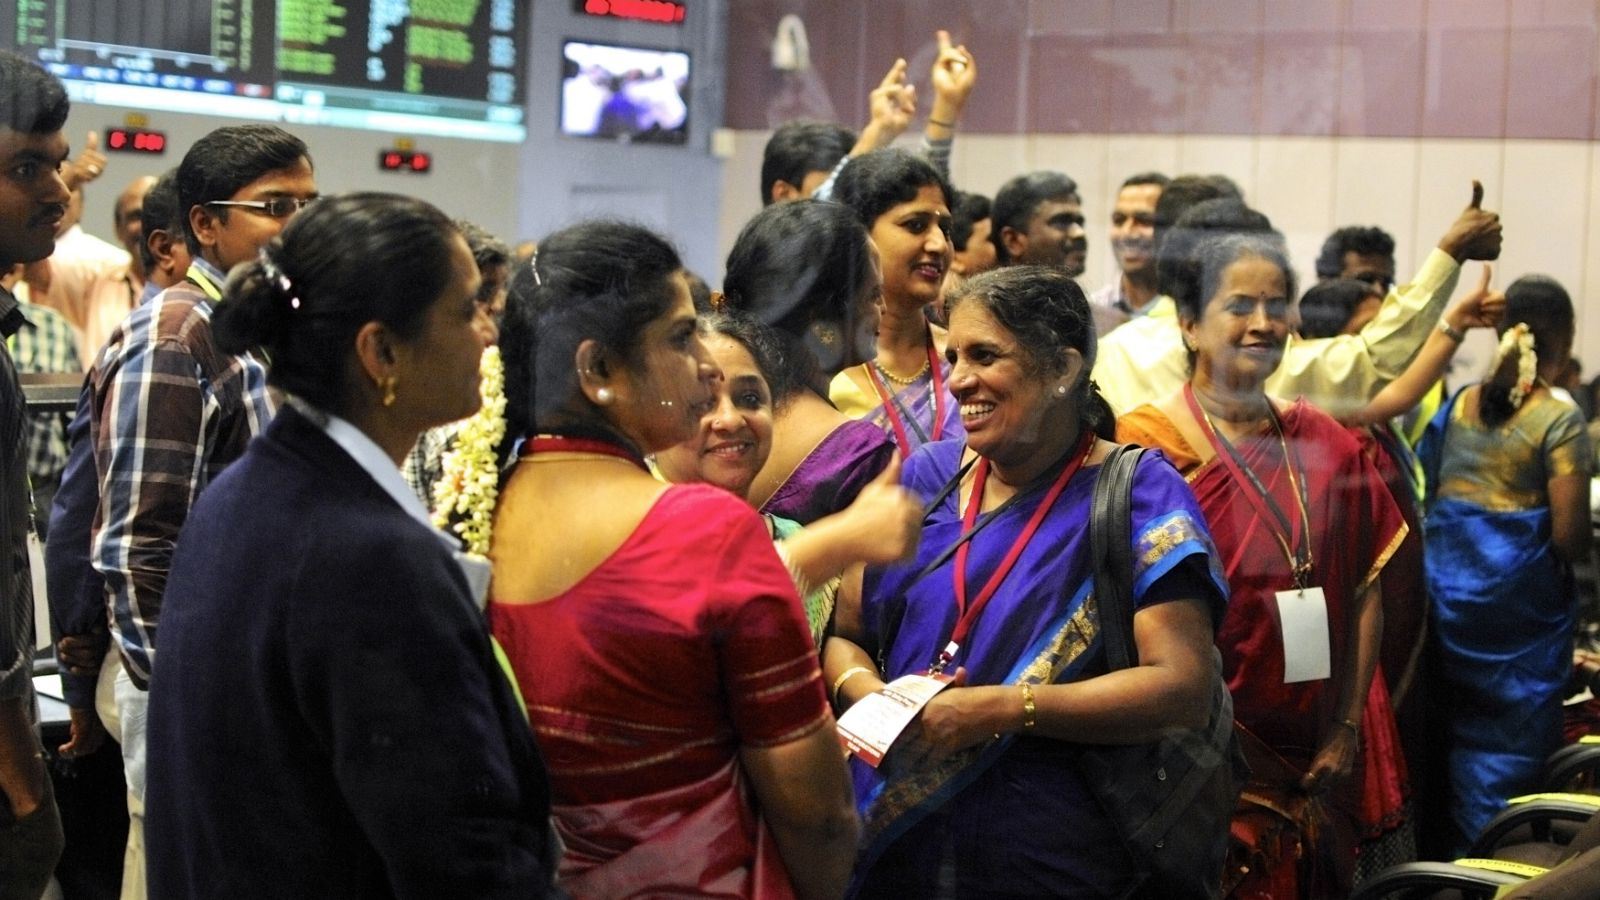 These women helped power India’s mission to Mars